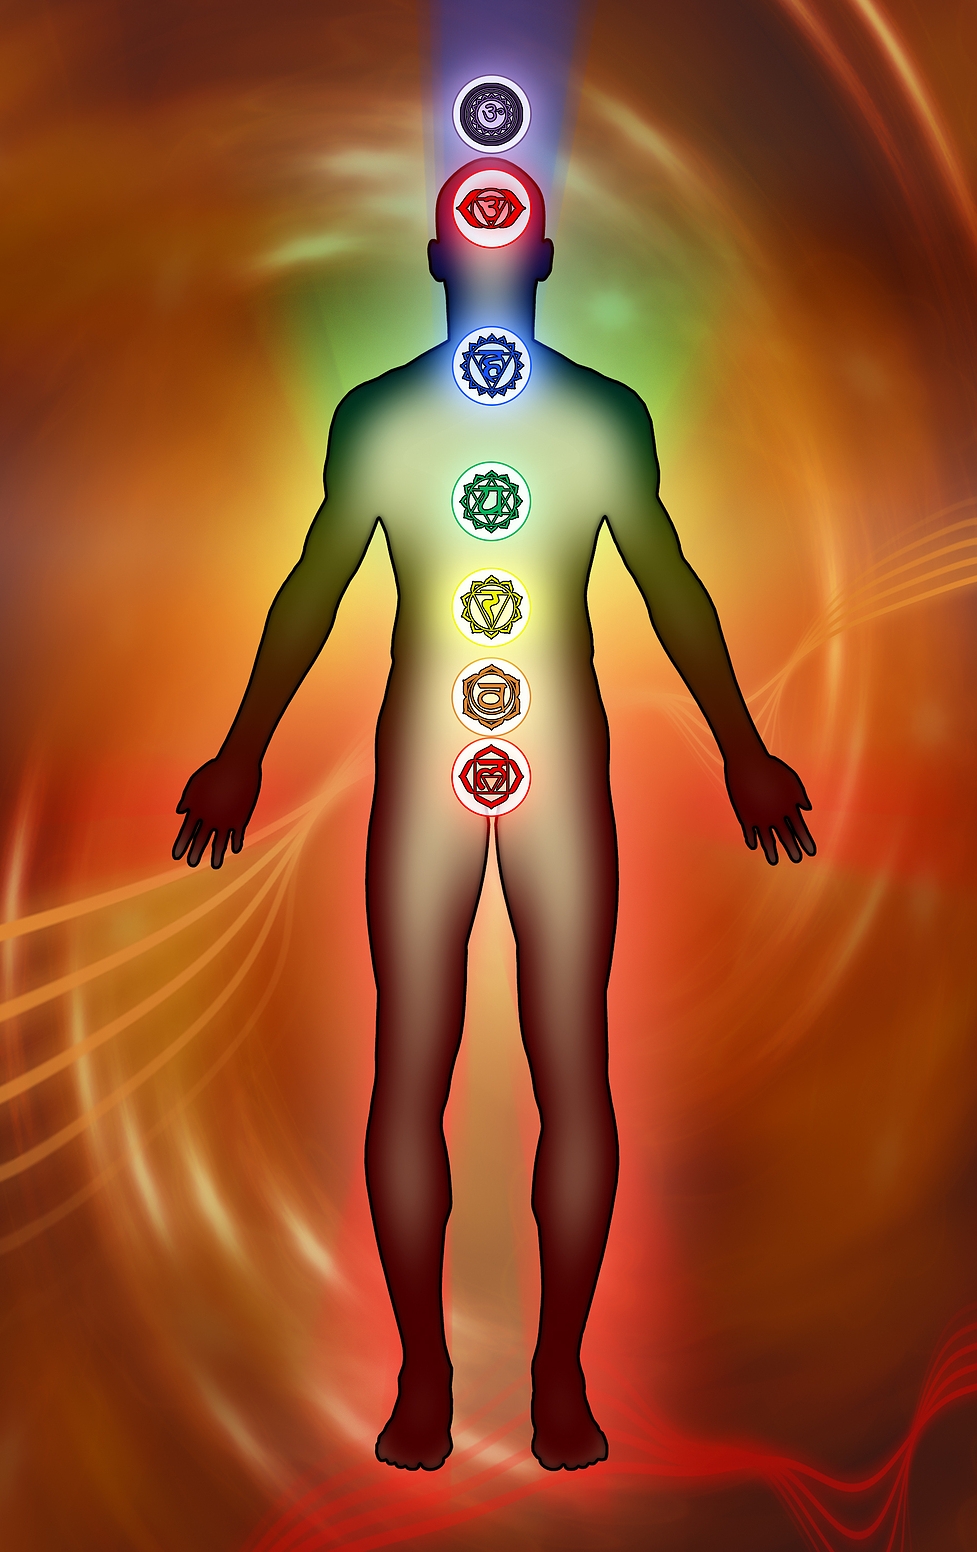 The seven chakras of the body, overlaid on a human figure.